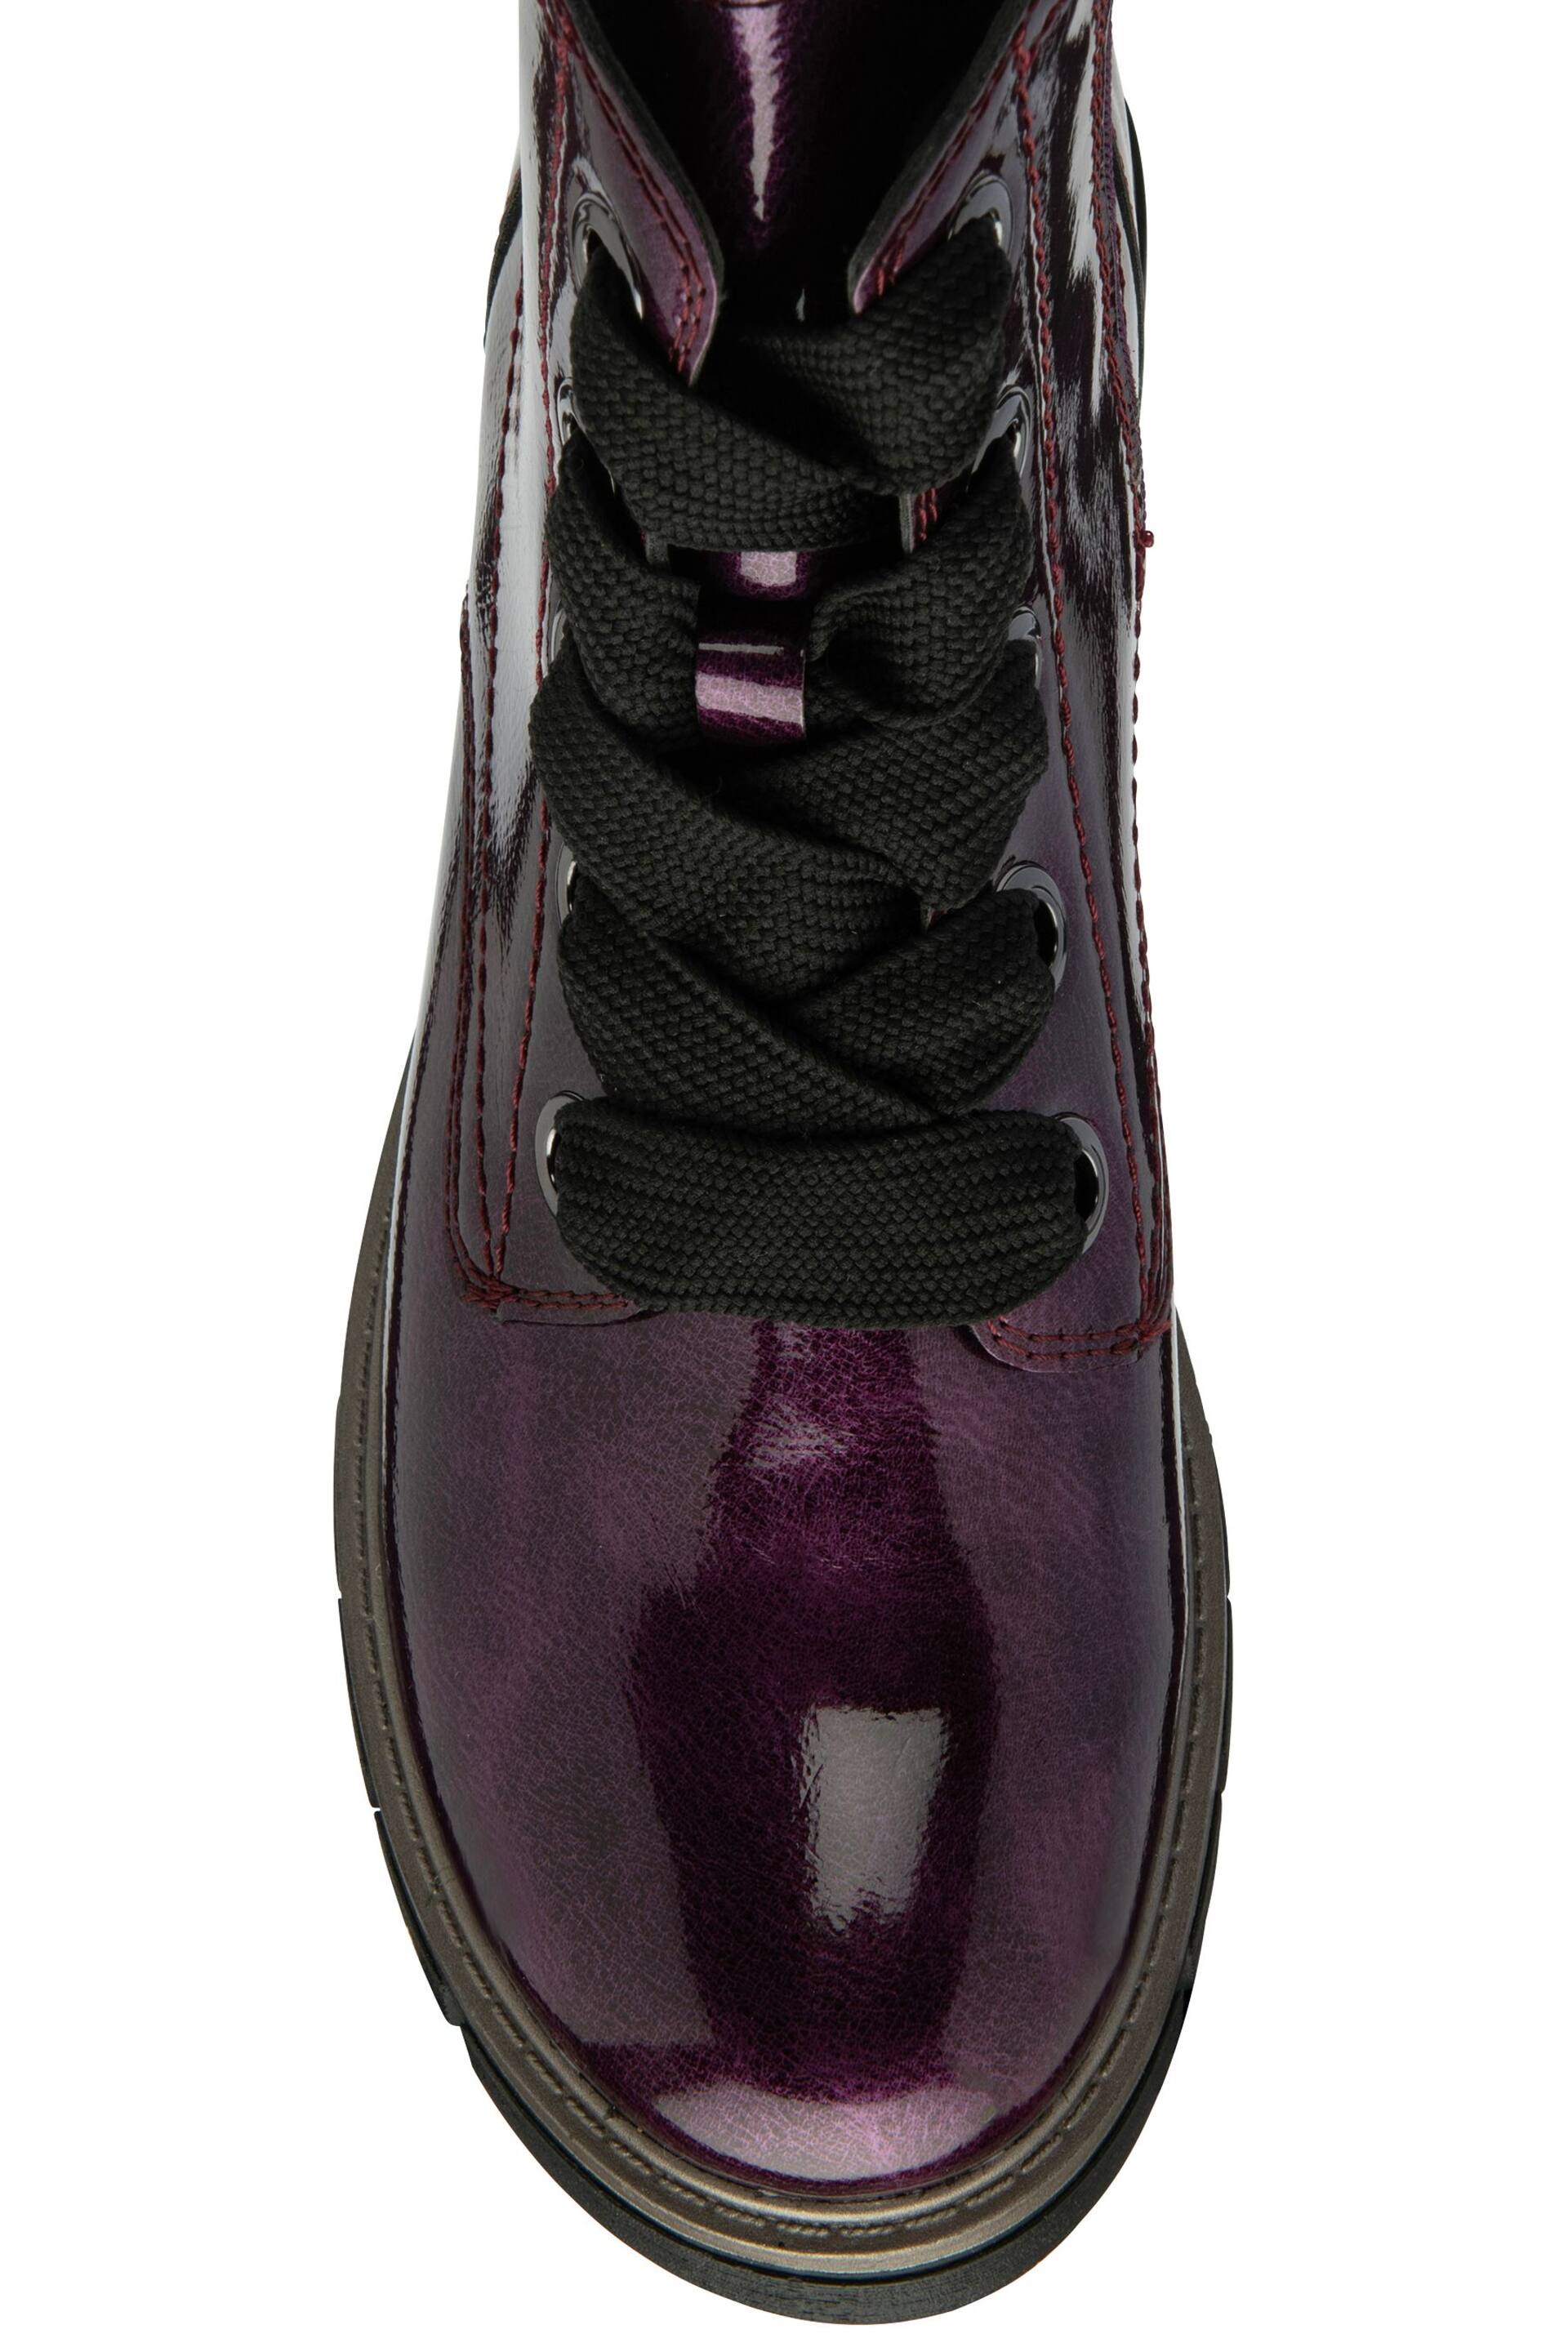 Lotus Purple Patent Lace-Up Ankle Boots - Image 4 of 4